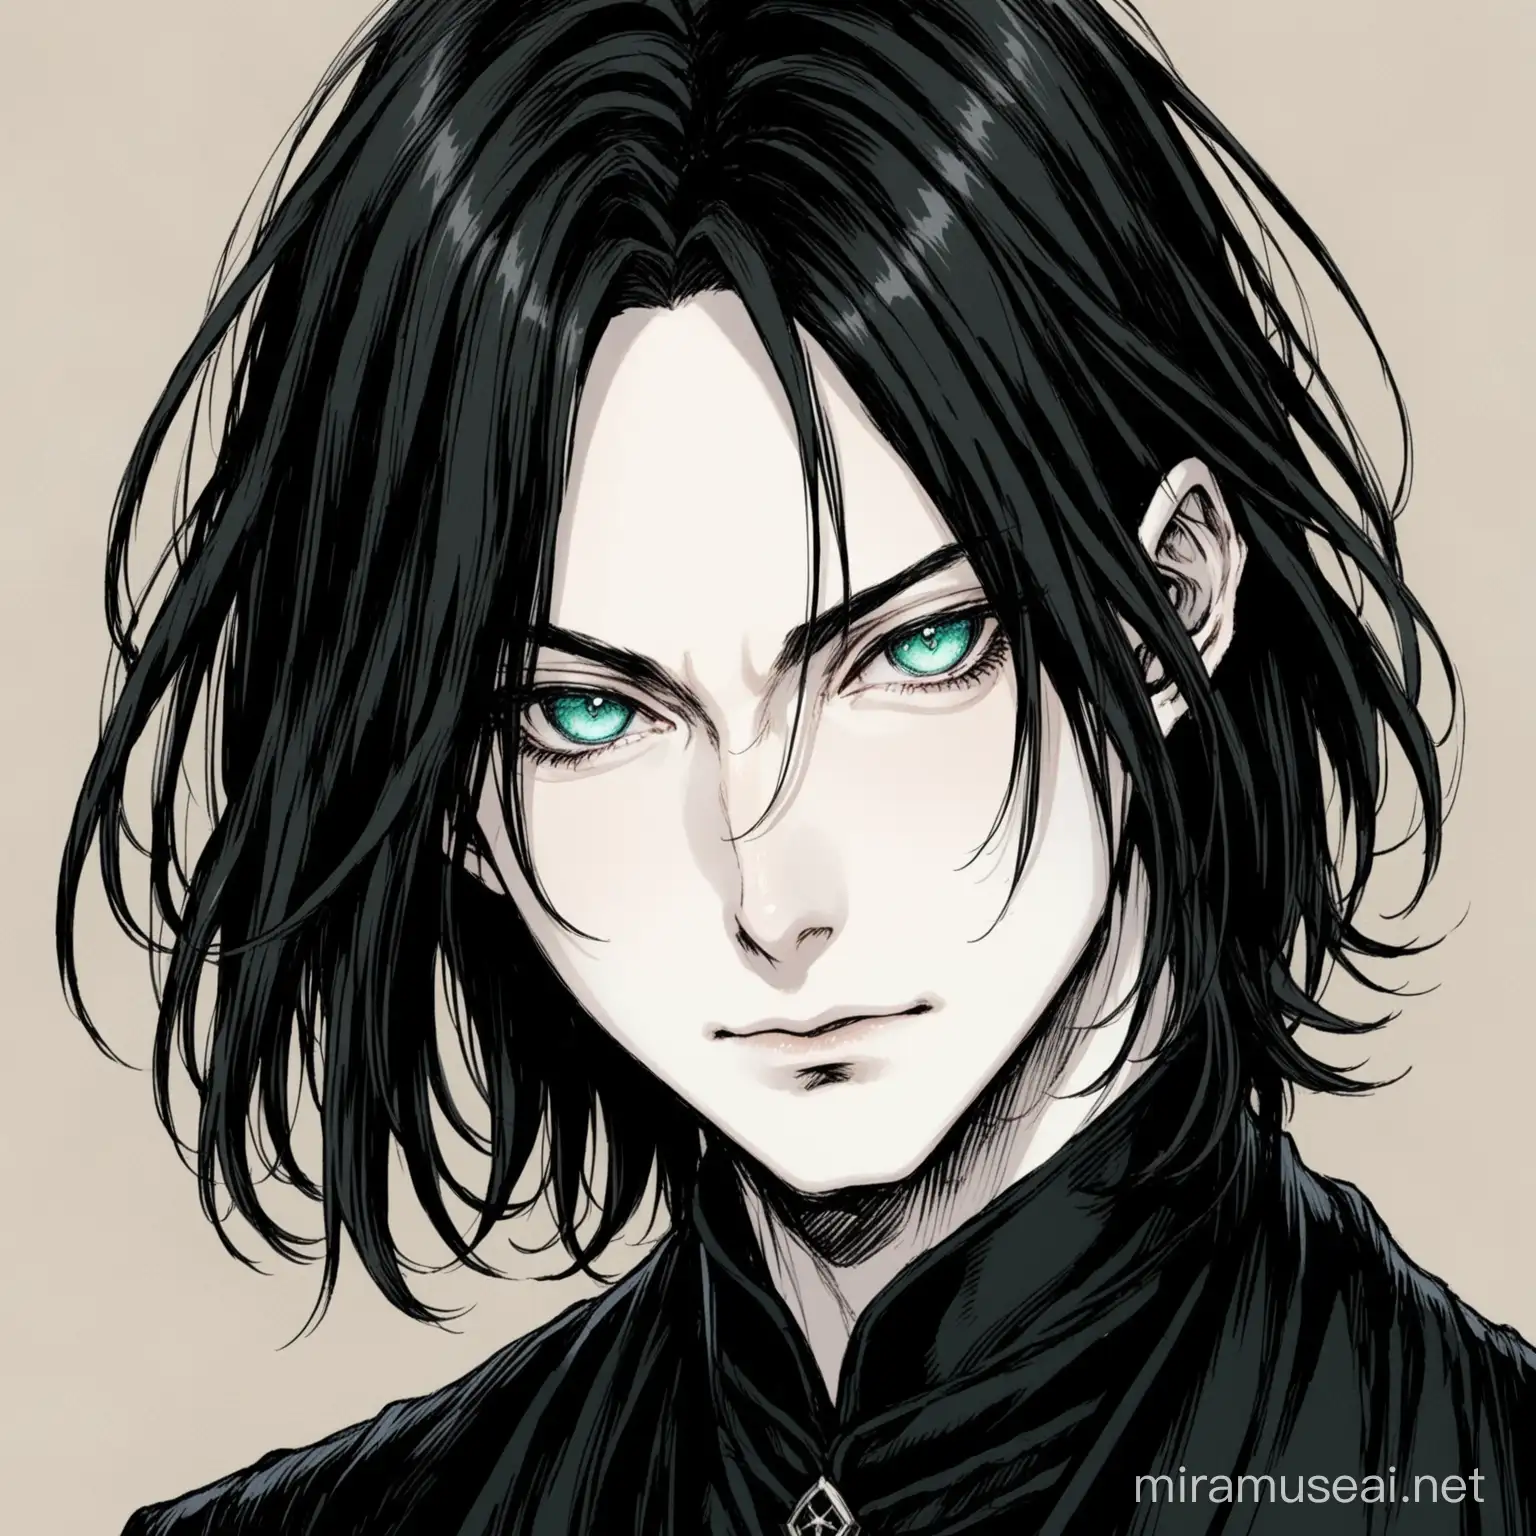 Young Severus Snape, portrait, onyx eyes, long loose hair, black greasy hair, white skin, pale complexion, elegant features, roman hooked nose, drawn by Ayami Kojima